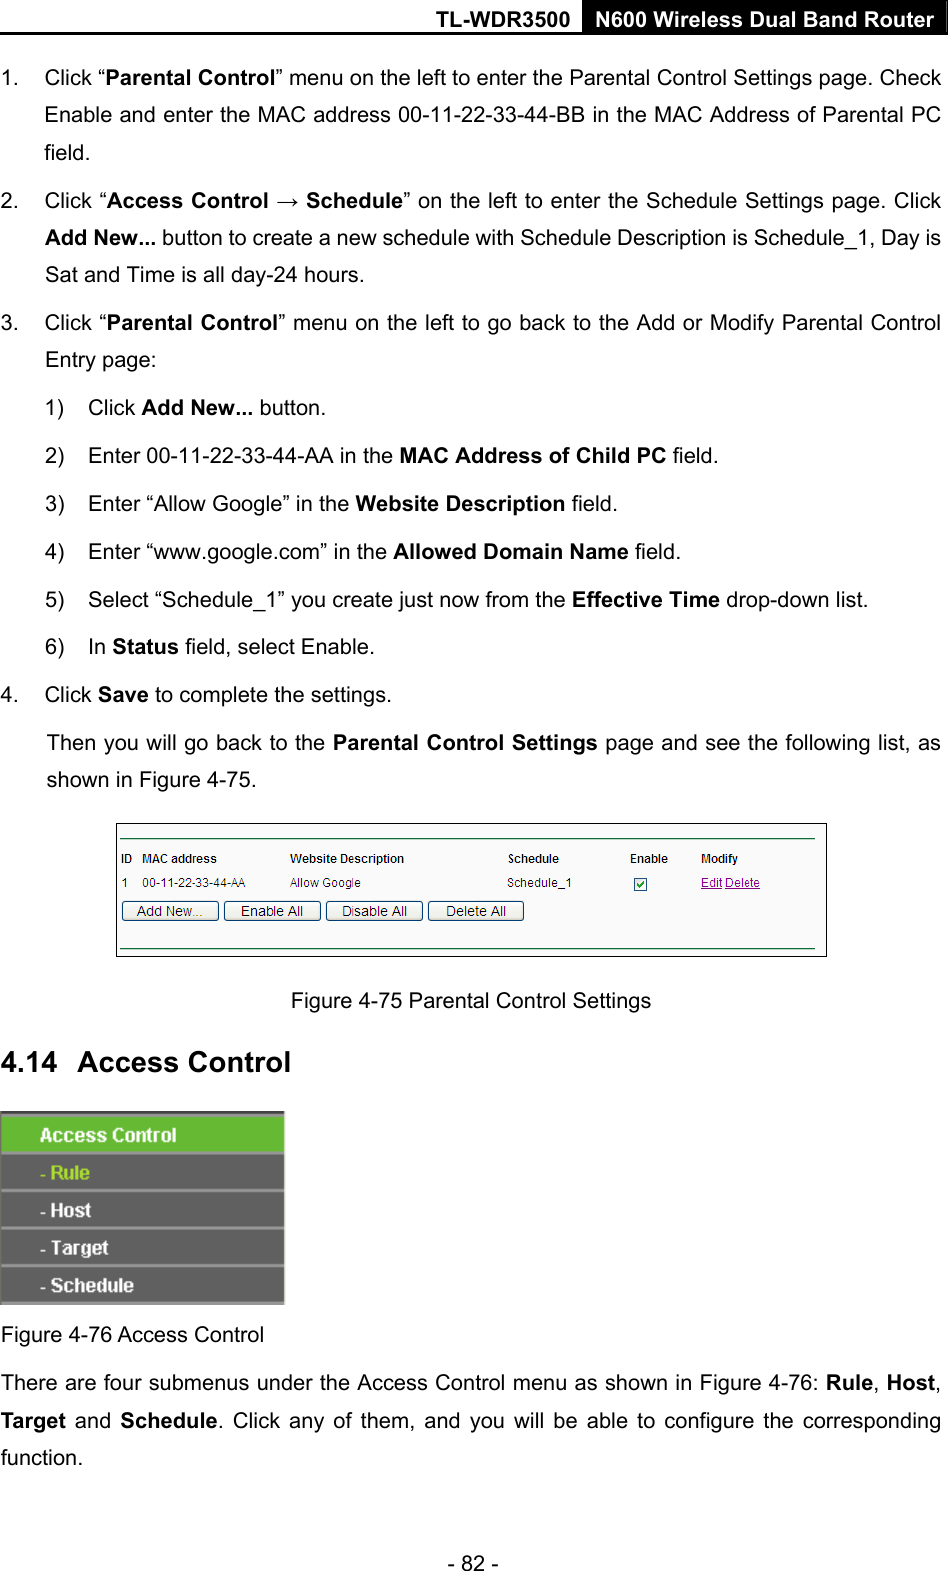 TL-WDR3500 N600 Wireless Dual Band Router - 82 - 1. Click “Parental Control” menu on the left to enter the Parental Control Settings page. Check Enable and enter the MAC address 00-11-22-33-44-BB in the MAC Address of Parental PC field.  2. Click “Access Control → Schedule” on the left to enter the Schedule Settings page. Click Add New... button to create a new schedule with Schedule Description is Schedule_1, Day is Sat and Time is all day-24 hours.   3. Click “Parental Control” menu on the left to go back to the Add or Modify Parental Control Entry page:   1) Click Add New... button.   2)  Enter 00-11-22-33-44-AA in the MAC Address of Child PC field.   3)  Enter “Allow Google” in the Website Description field.   4)  Enter “www.google.com” in the Allowed Domain Name field.   5)  Select “Schedule_1” you create just now from the Effective Time drop-down list.   6) In Status field, select Enable.   4. Click Save to complete the settings. Then you will go back to the Parental Control Settings page and see the following list, as shown in Figure 4-75.  Figure 4-75 Parental Control Settings 4.14  Access Control  Figure 4-76 Access Control There are four submenus under the Access Control menu as shown in Figure 4-76: Rule, Host, Target and Schedule. Click any of them, and you will be able to configure the corresponding function. 